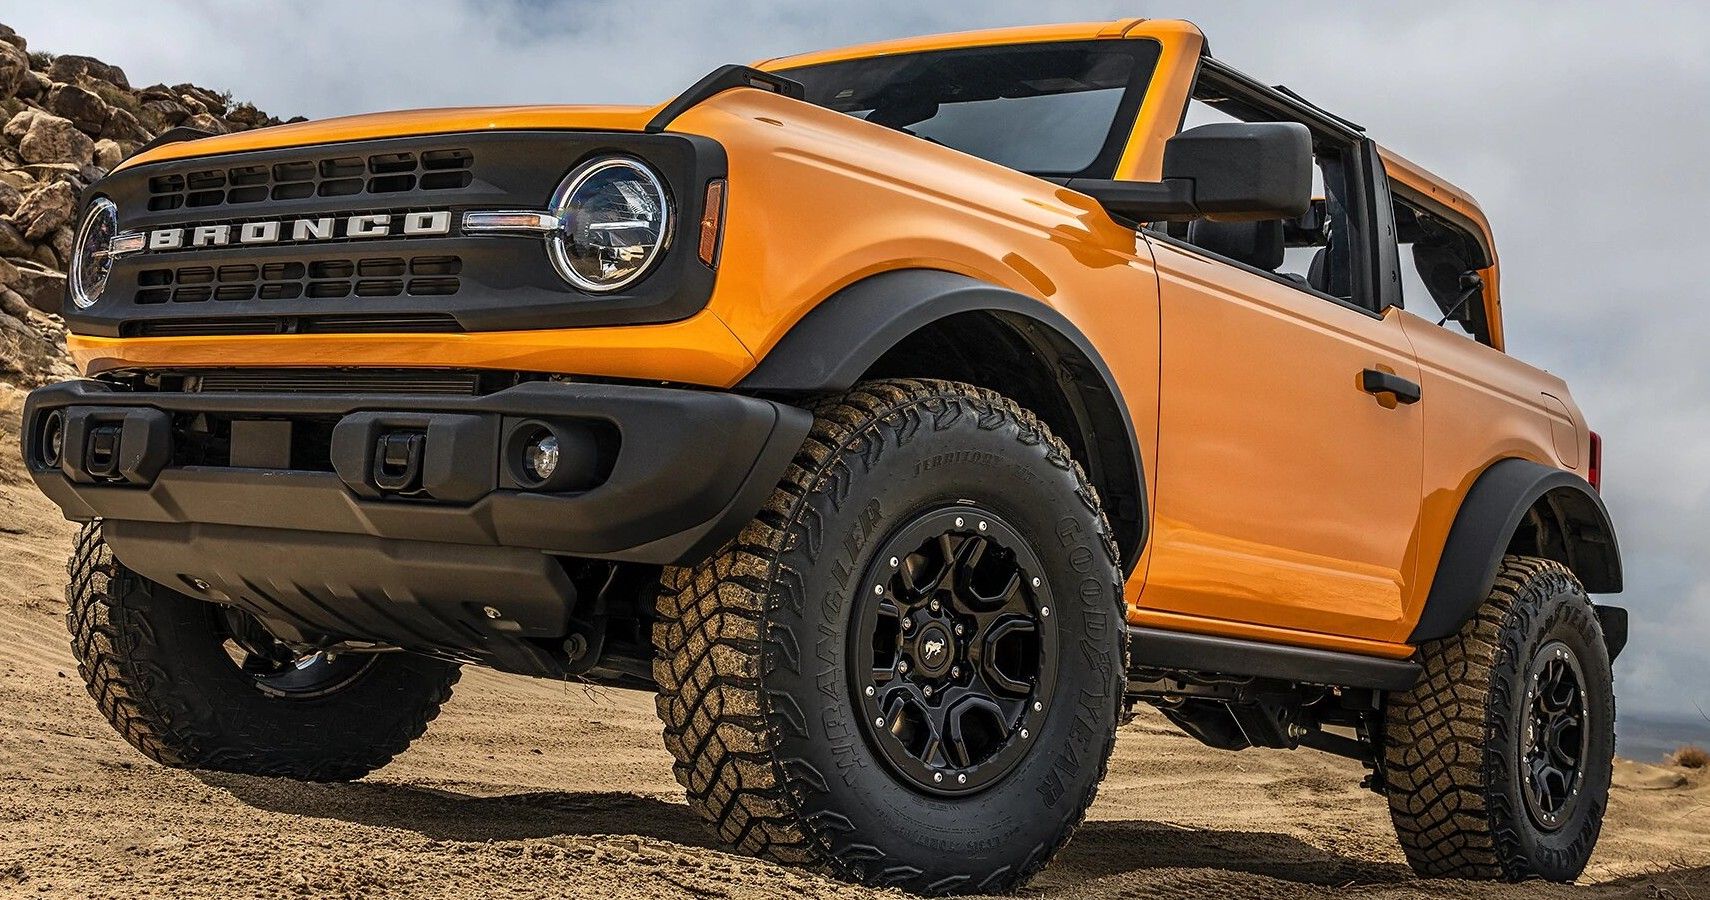 The Bronco Sasquatch offers a midpoint between the base Bronco and range topping Wildtrak